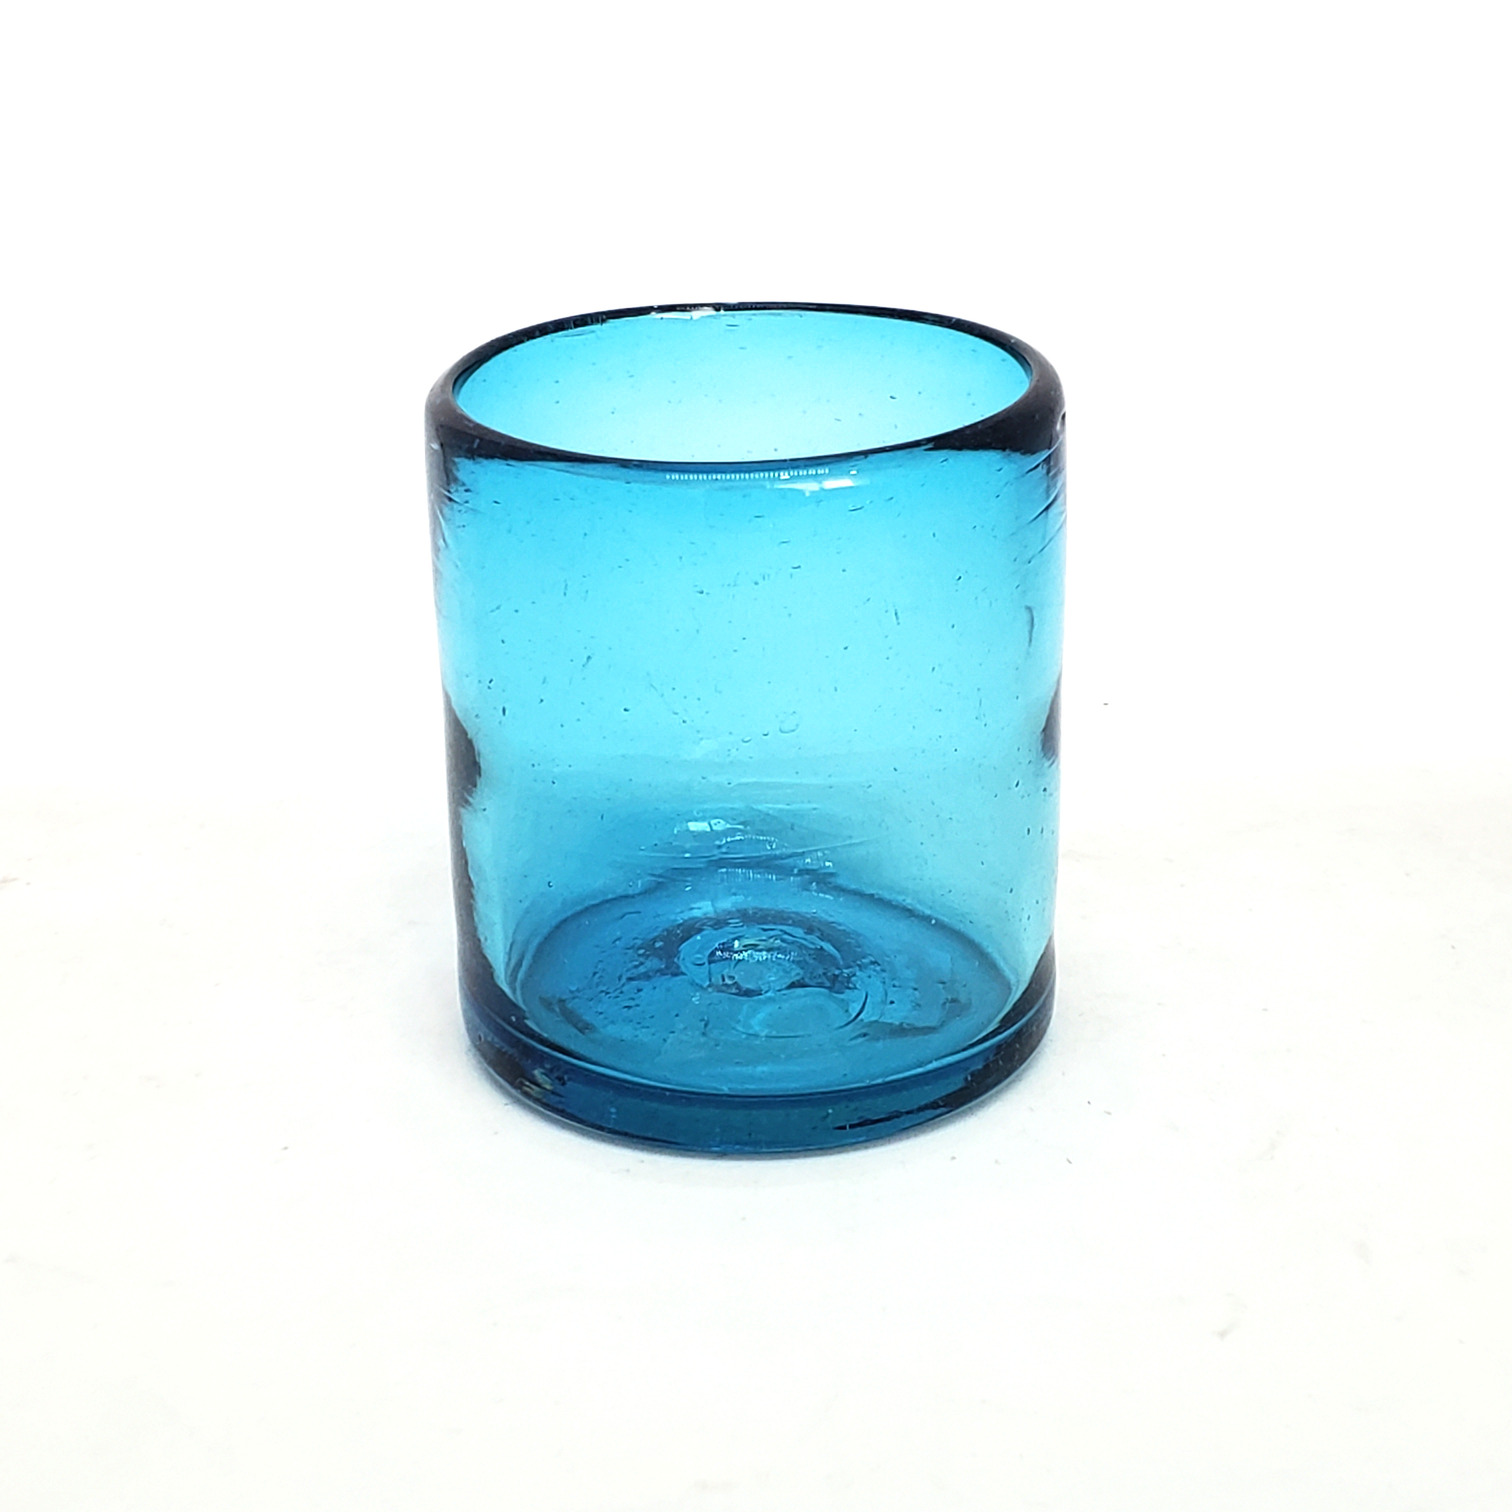 Wholesale MEXICAN GLASSWARE / Solid Aqua Blue 9 oz Short Tumblers  / Enhance your favorite drink with these colorful handcrafted glasses.